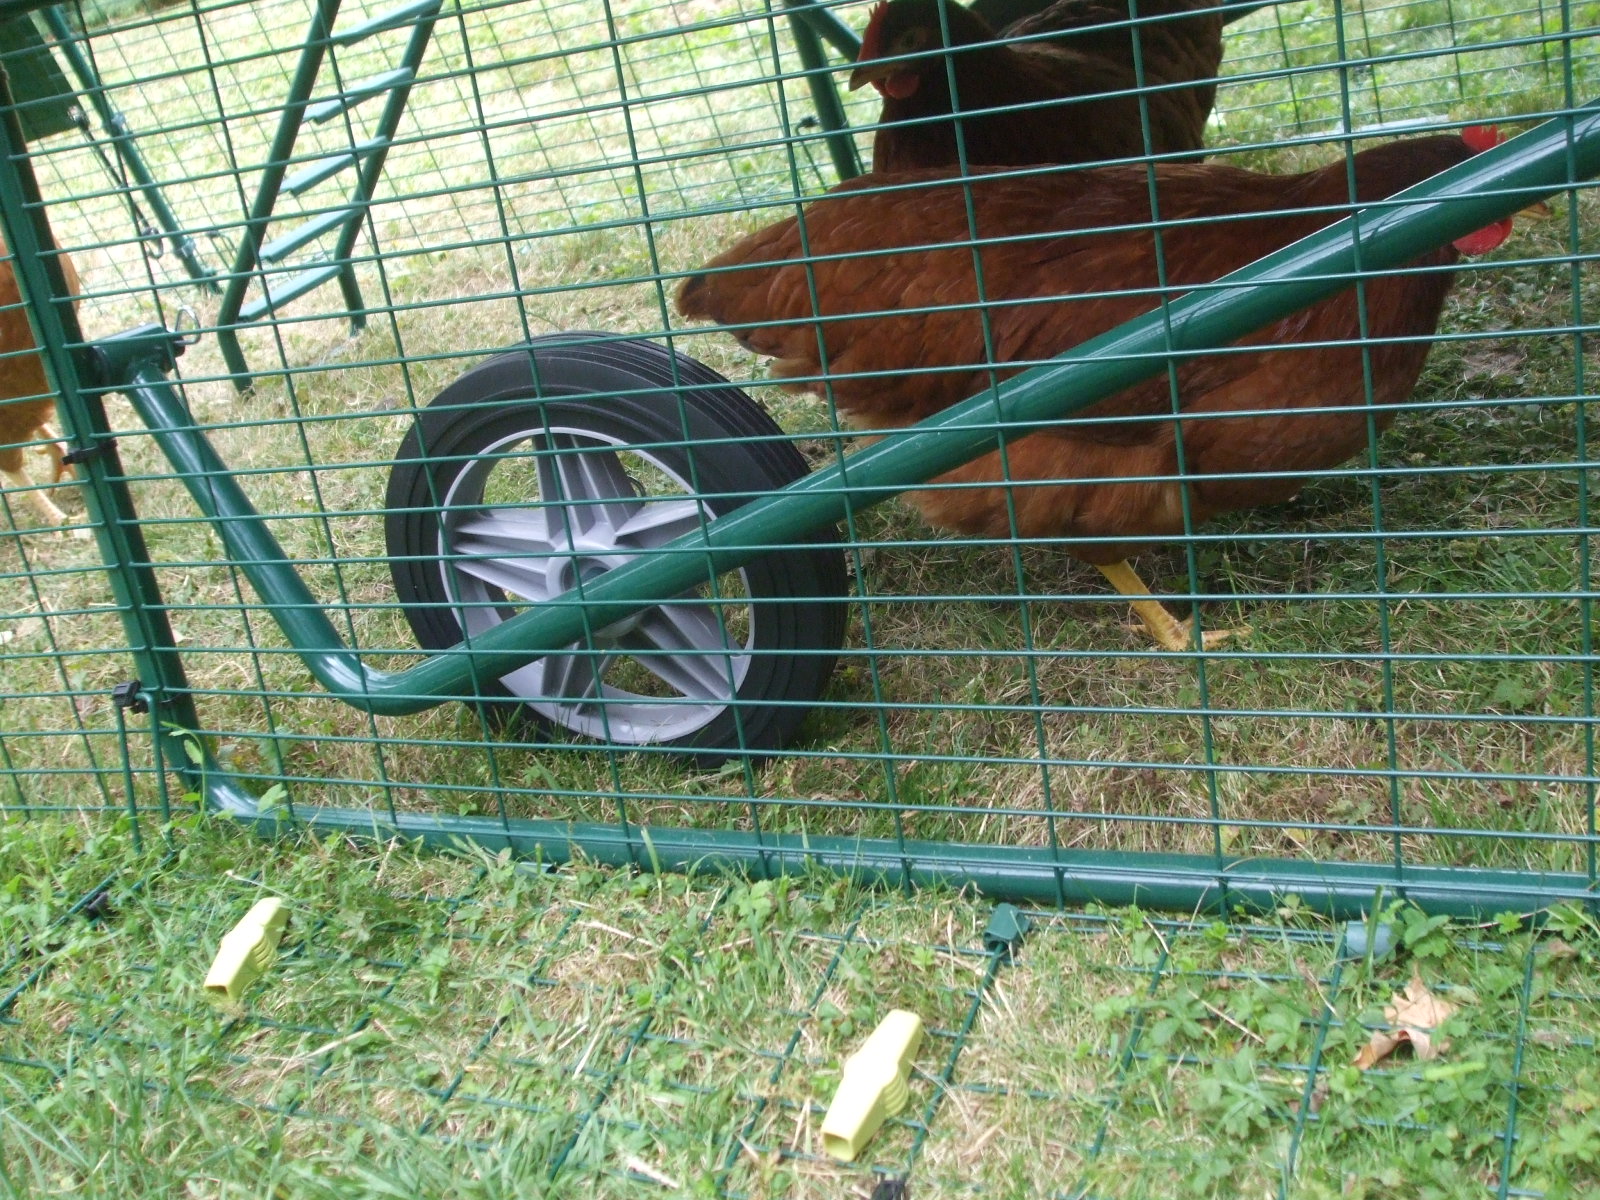 The wheel on the underside of the Eglu Cube chicken coop.